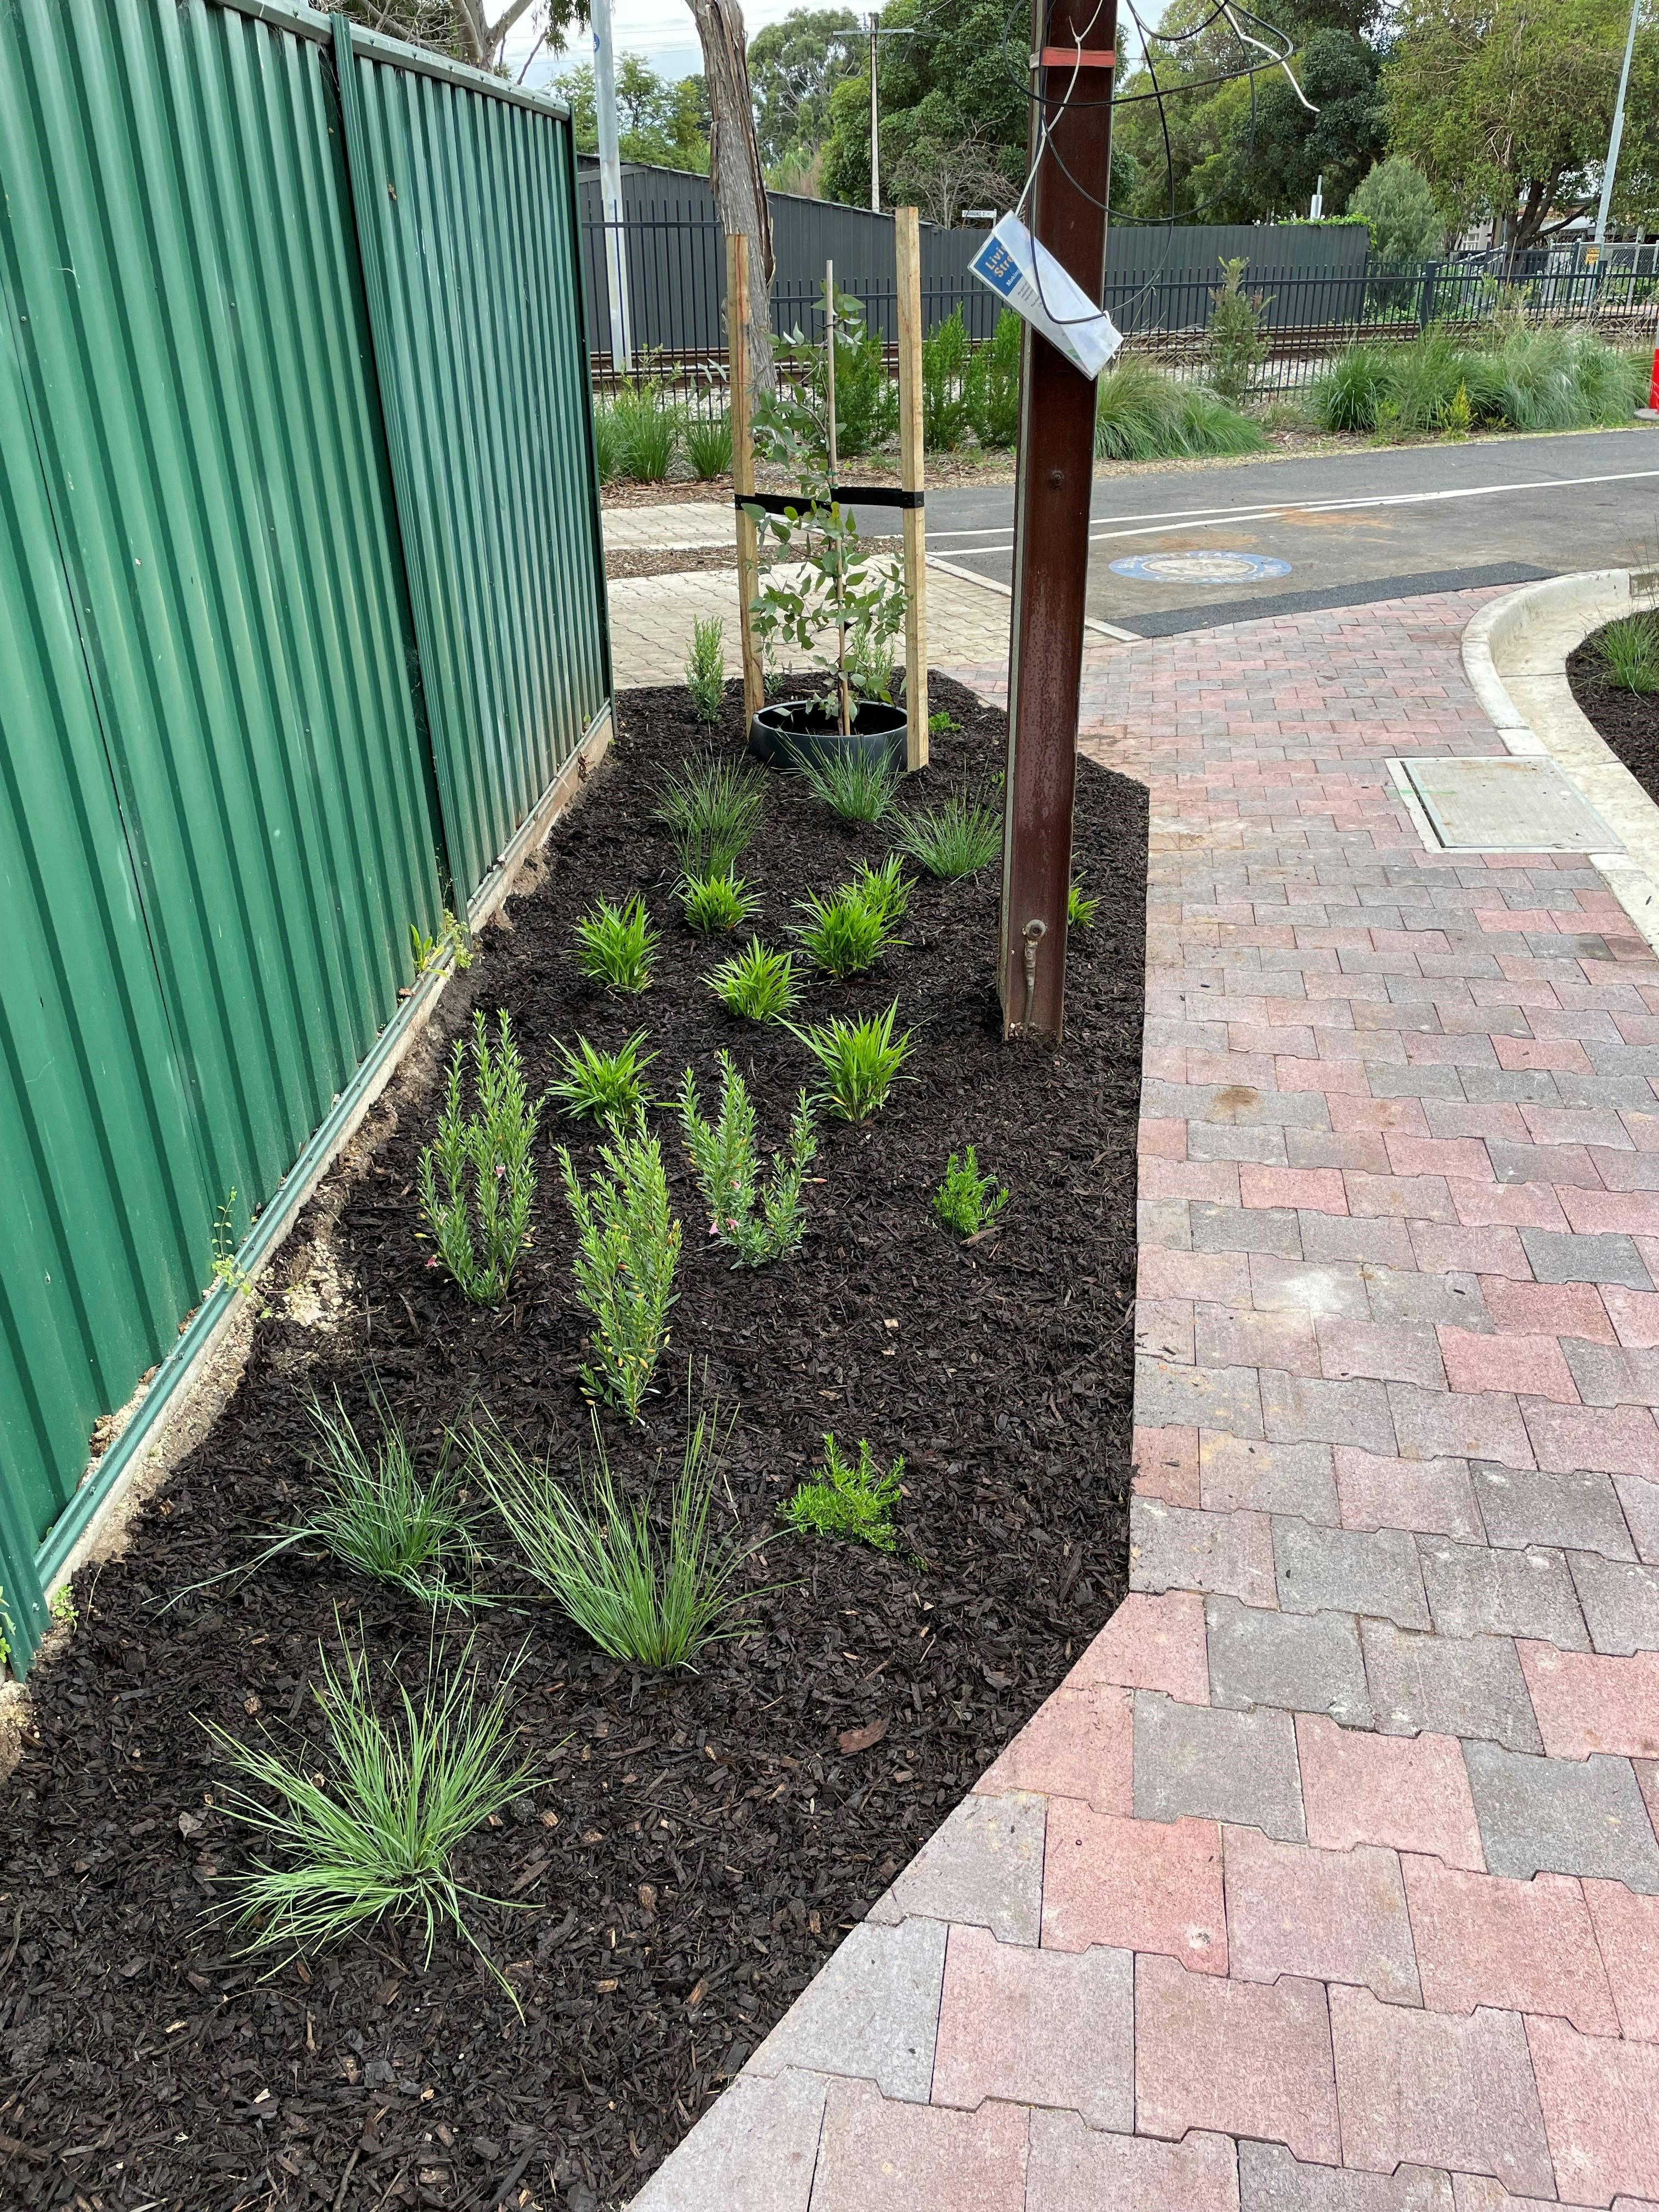 Rogers St - New plantings and path way connections